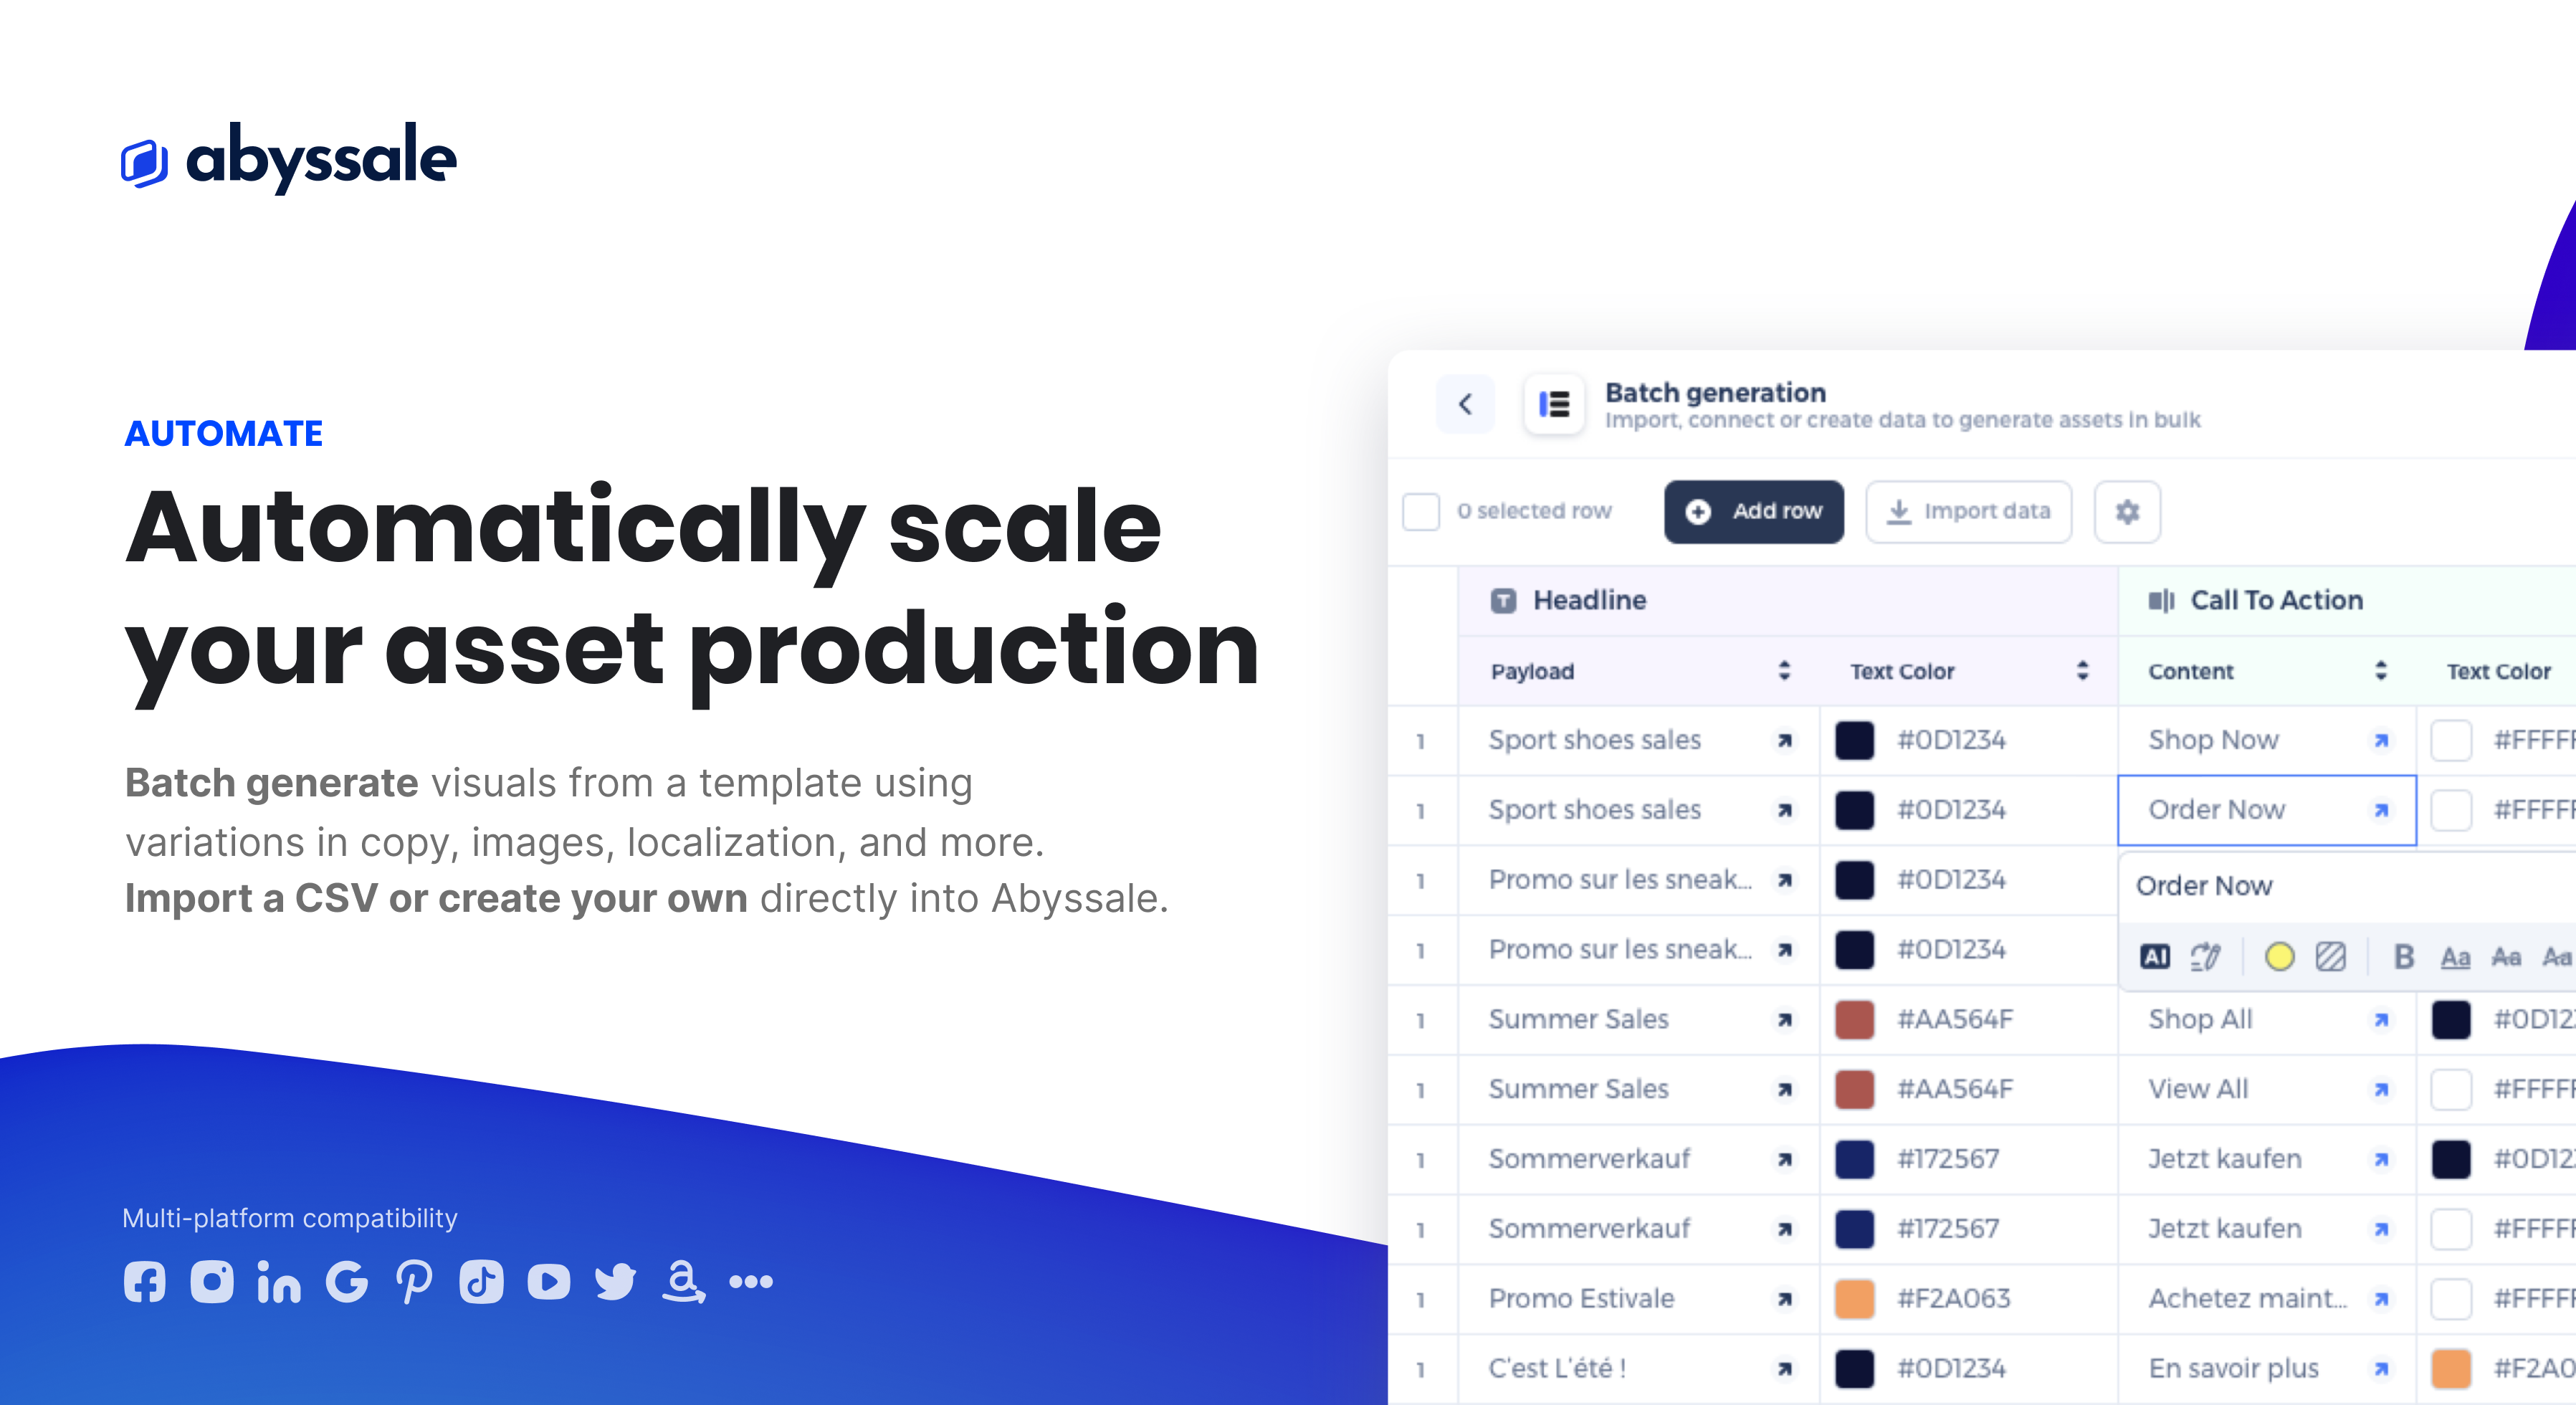 Abyssale Automatically scale your asset production